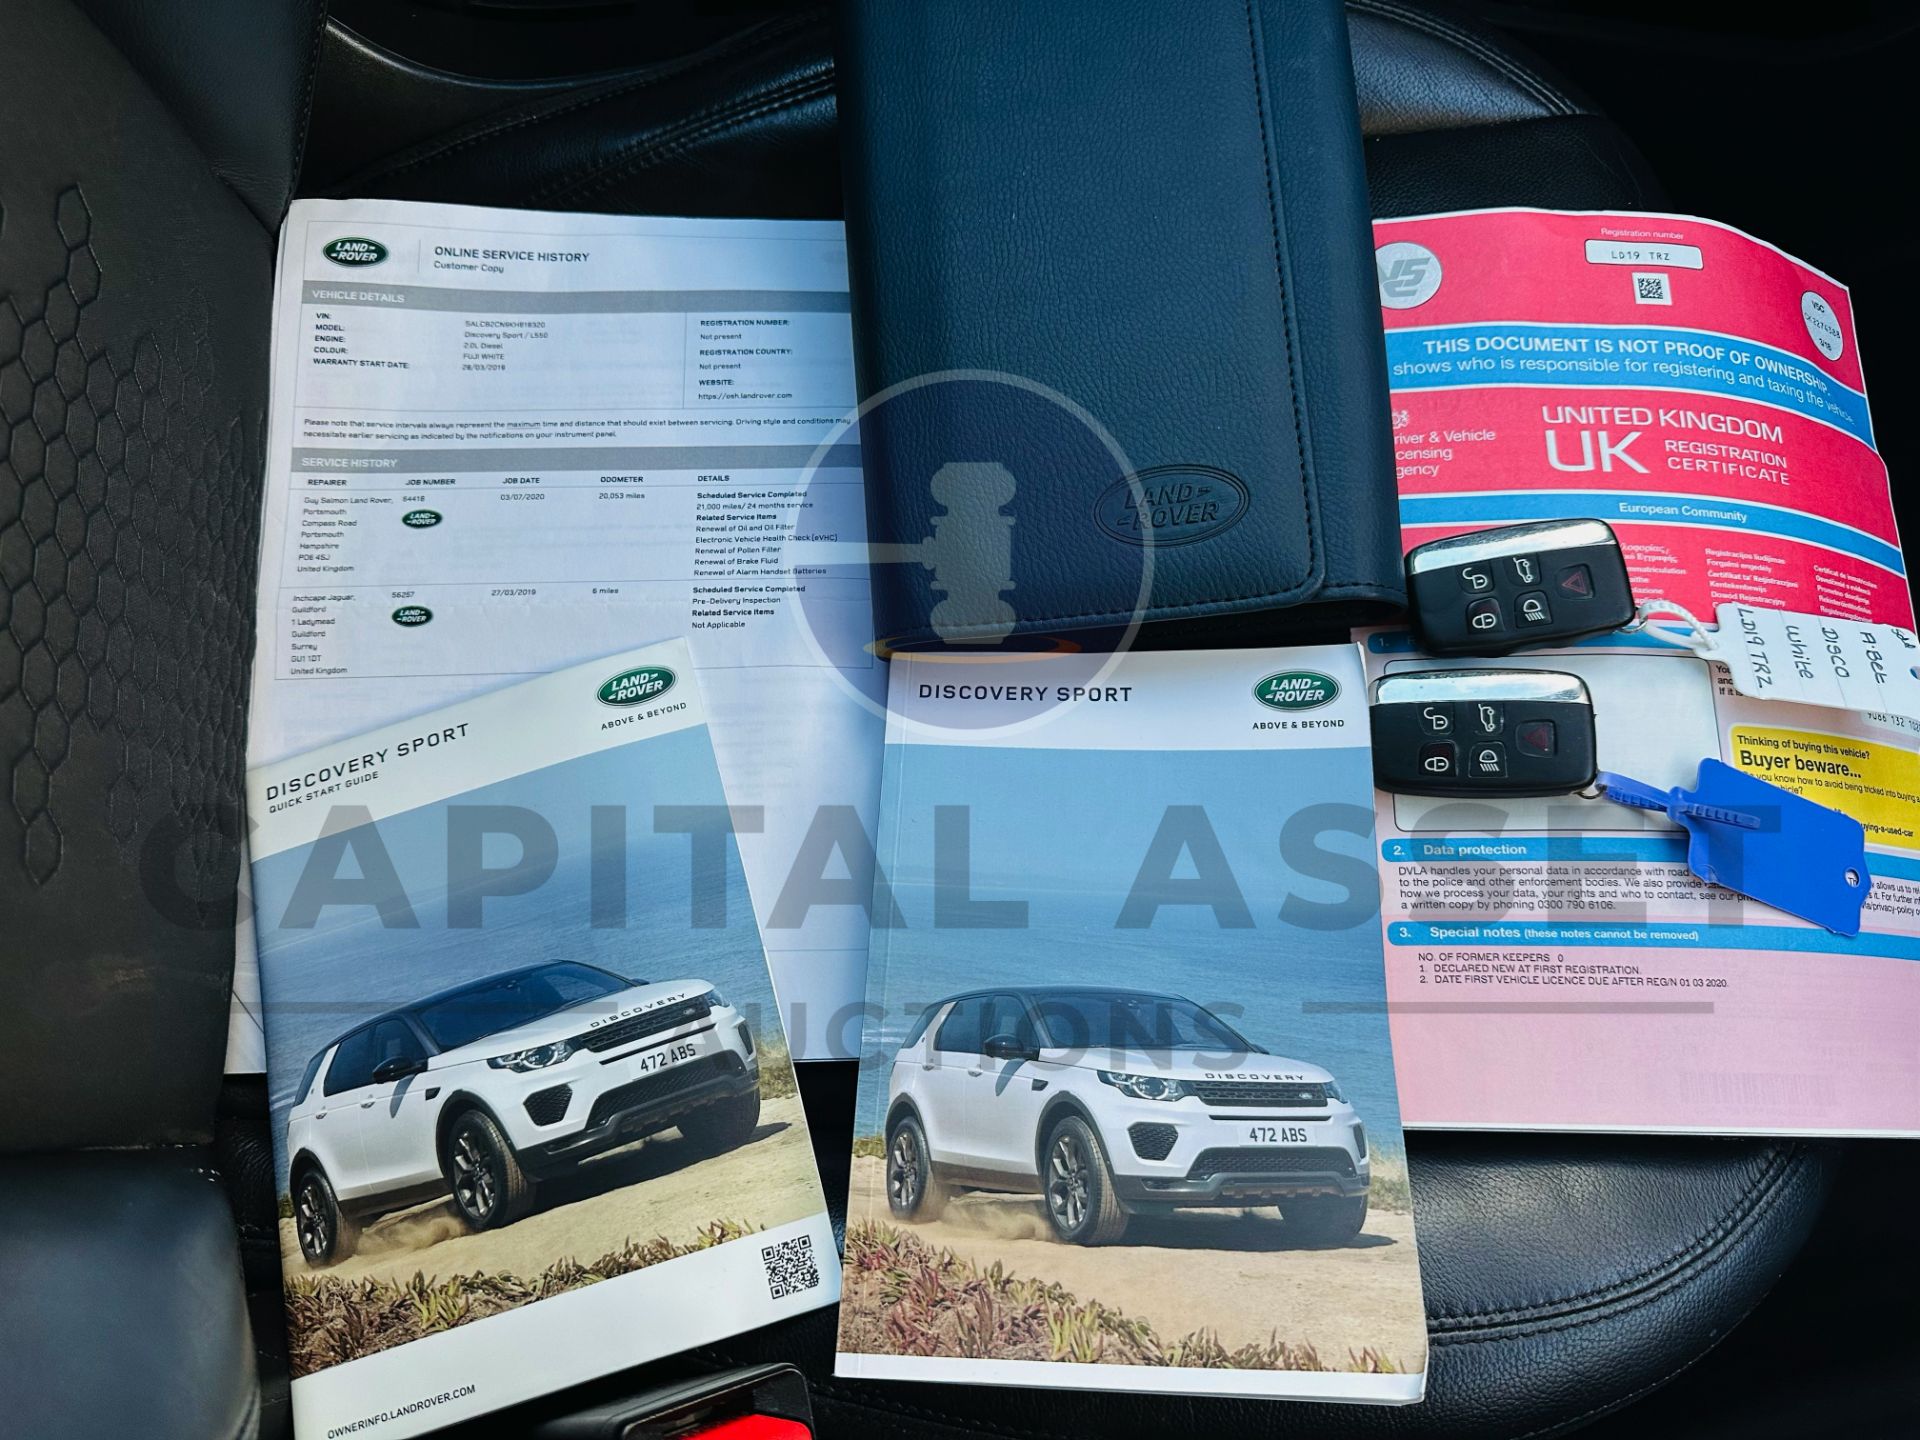 (On Sale) LAND ROVER DISCOVERY SPORT *SE* 5 DOOR SUV (2019 - EURO 6) 2.0 ED4 - AUTO STOP/START - Image 38 of 38